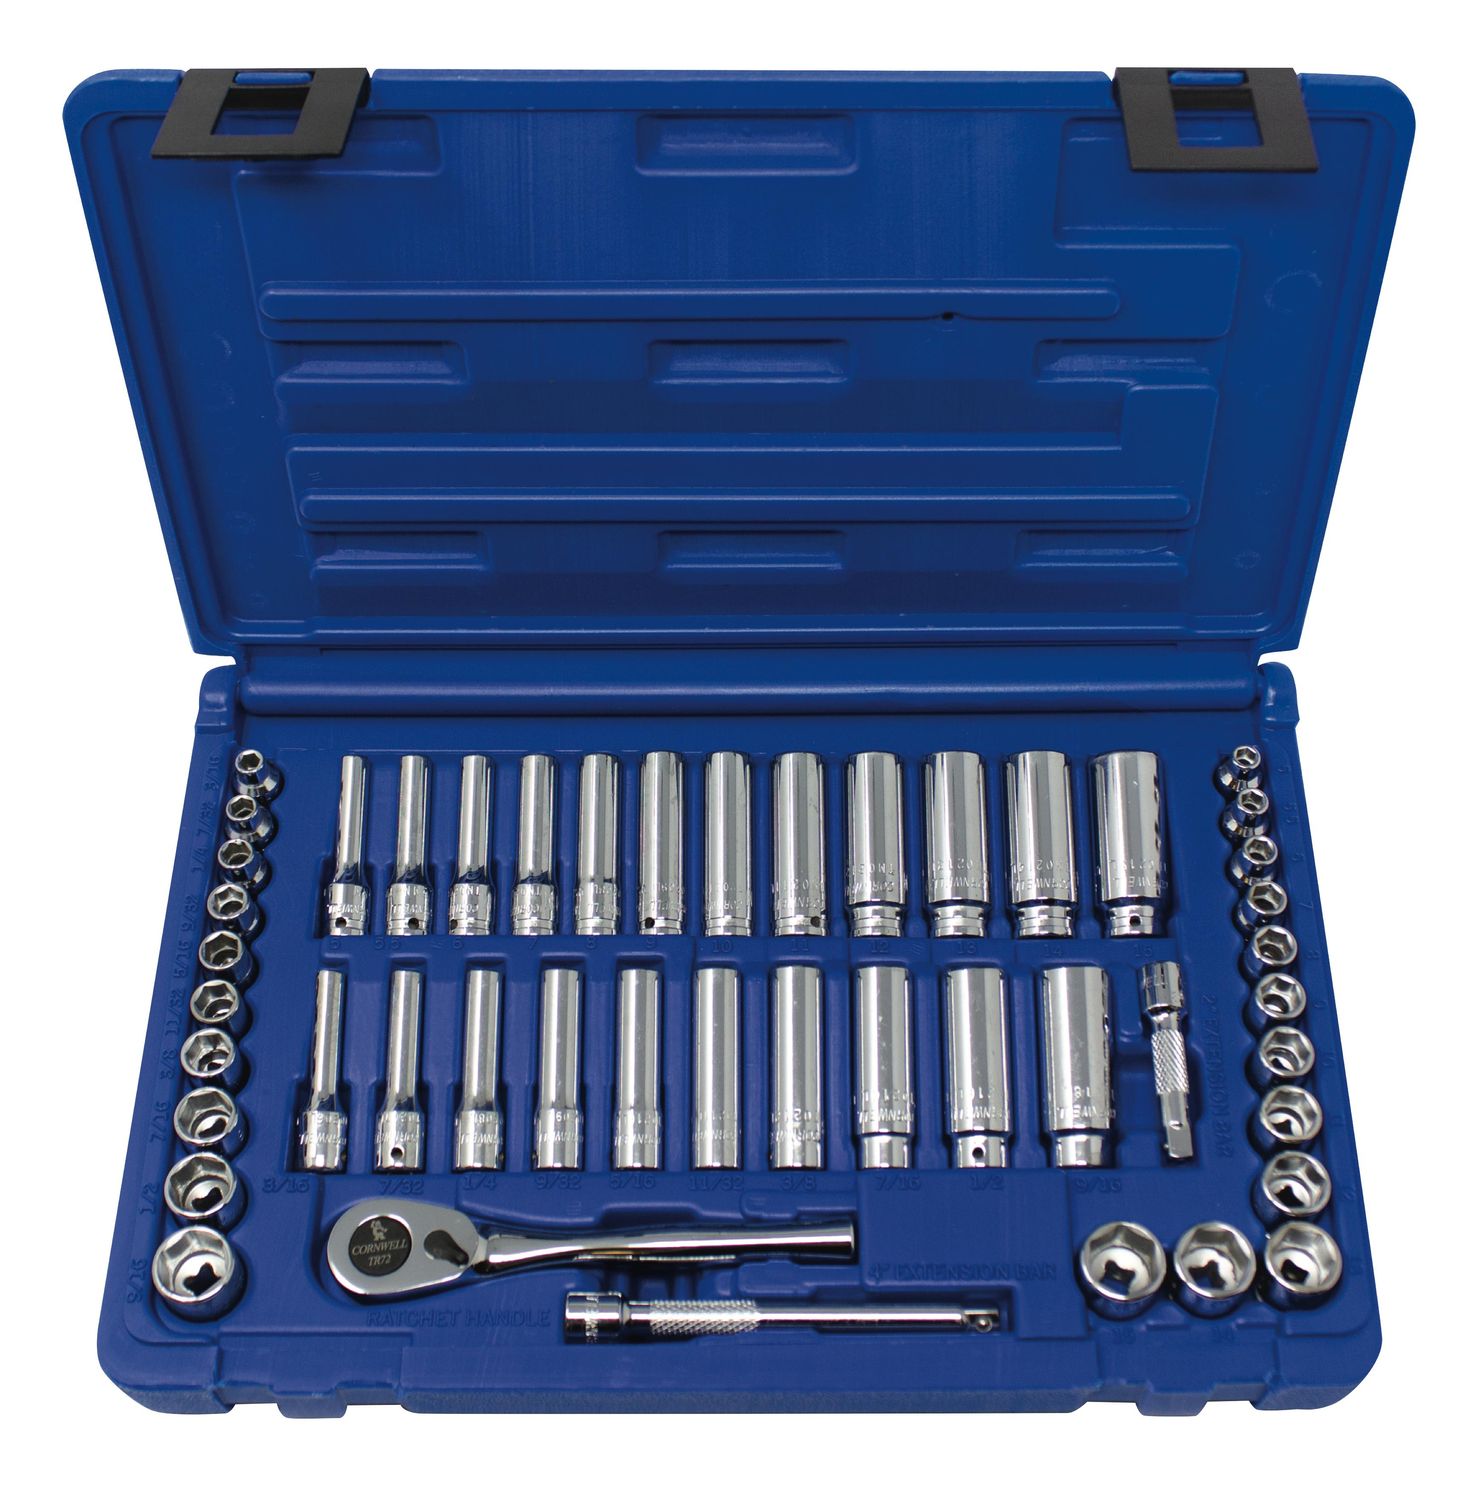 TS047SSFT - 47 Piece 1/4” Drive Super Set, 6 Point with Fine Tooth Ratchet